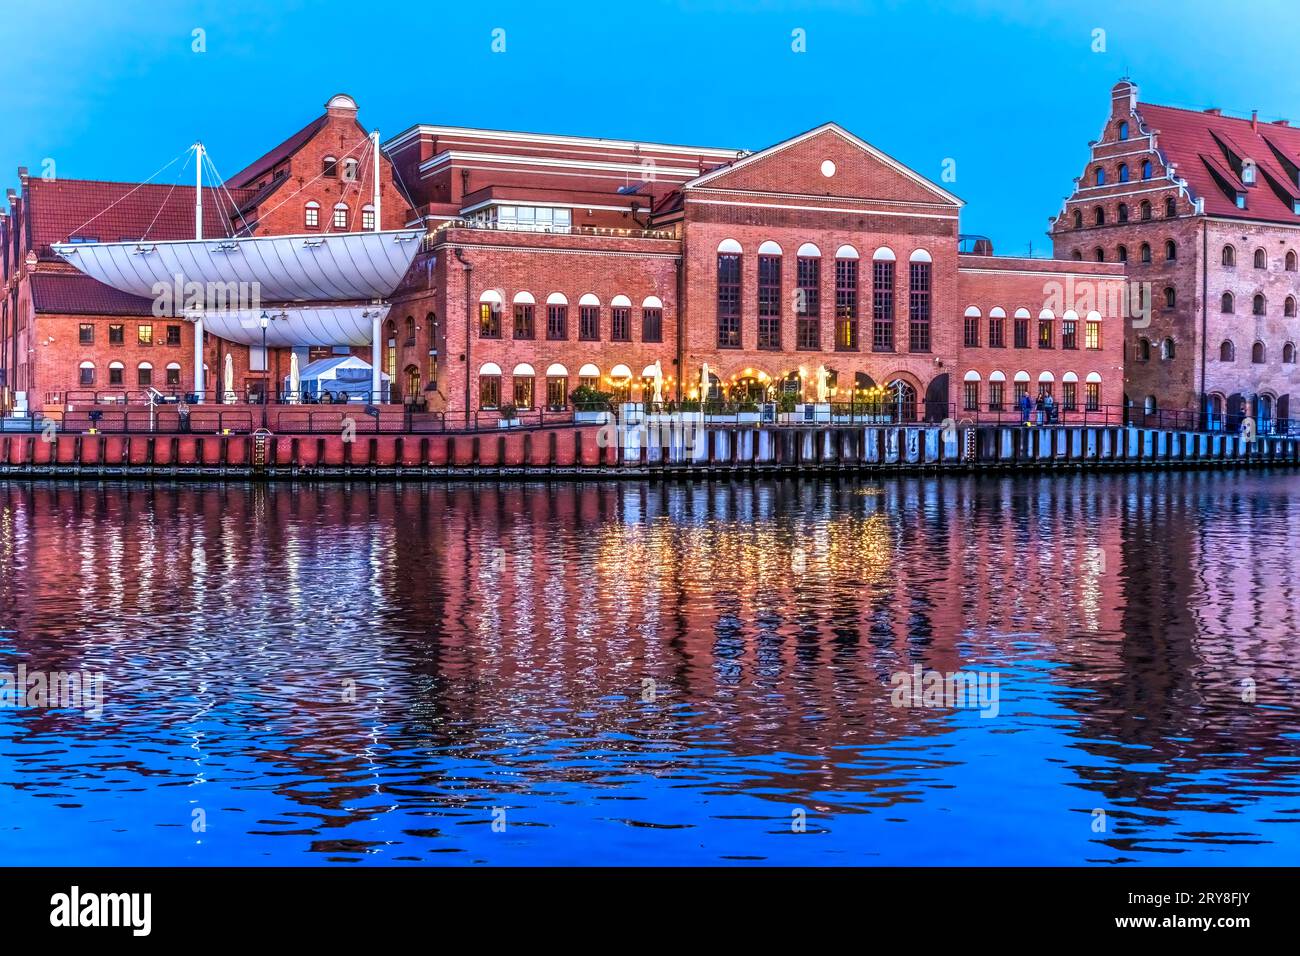 Colorful Polish Baltic F. Chopin Philharmonic Concert Hall Inner Harbor Port Motlawa River Historic Old Town of Gdansk Poland. Hall Built in 1897. Stock Photo